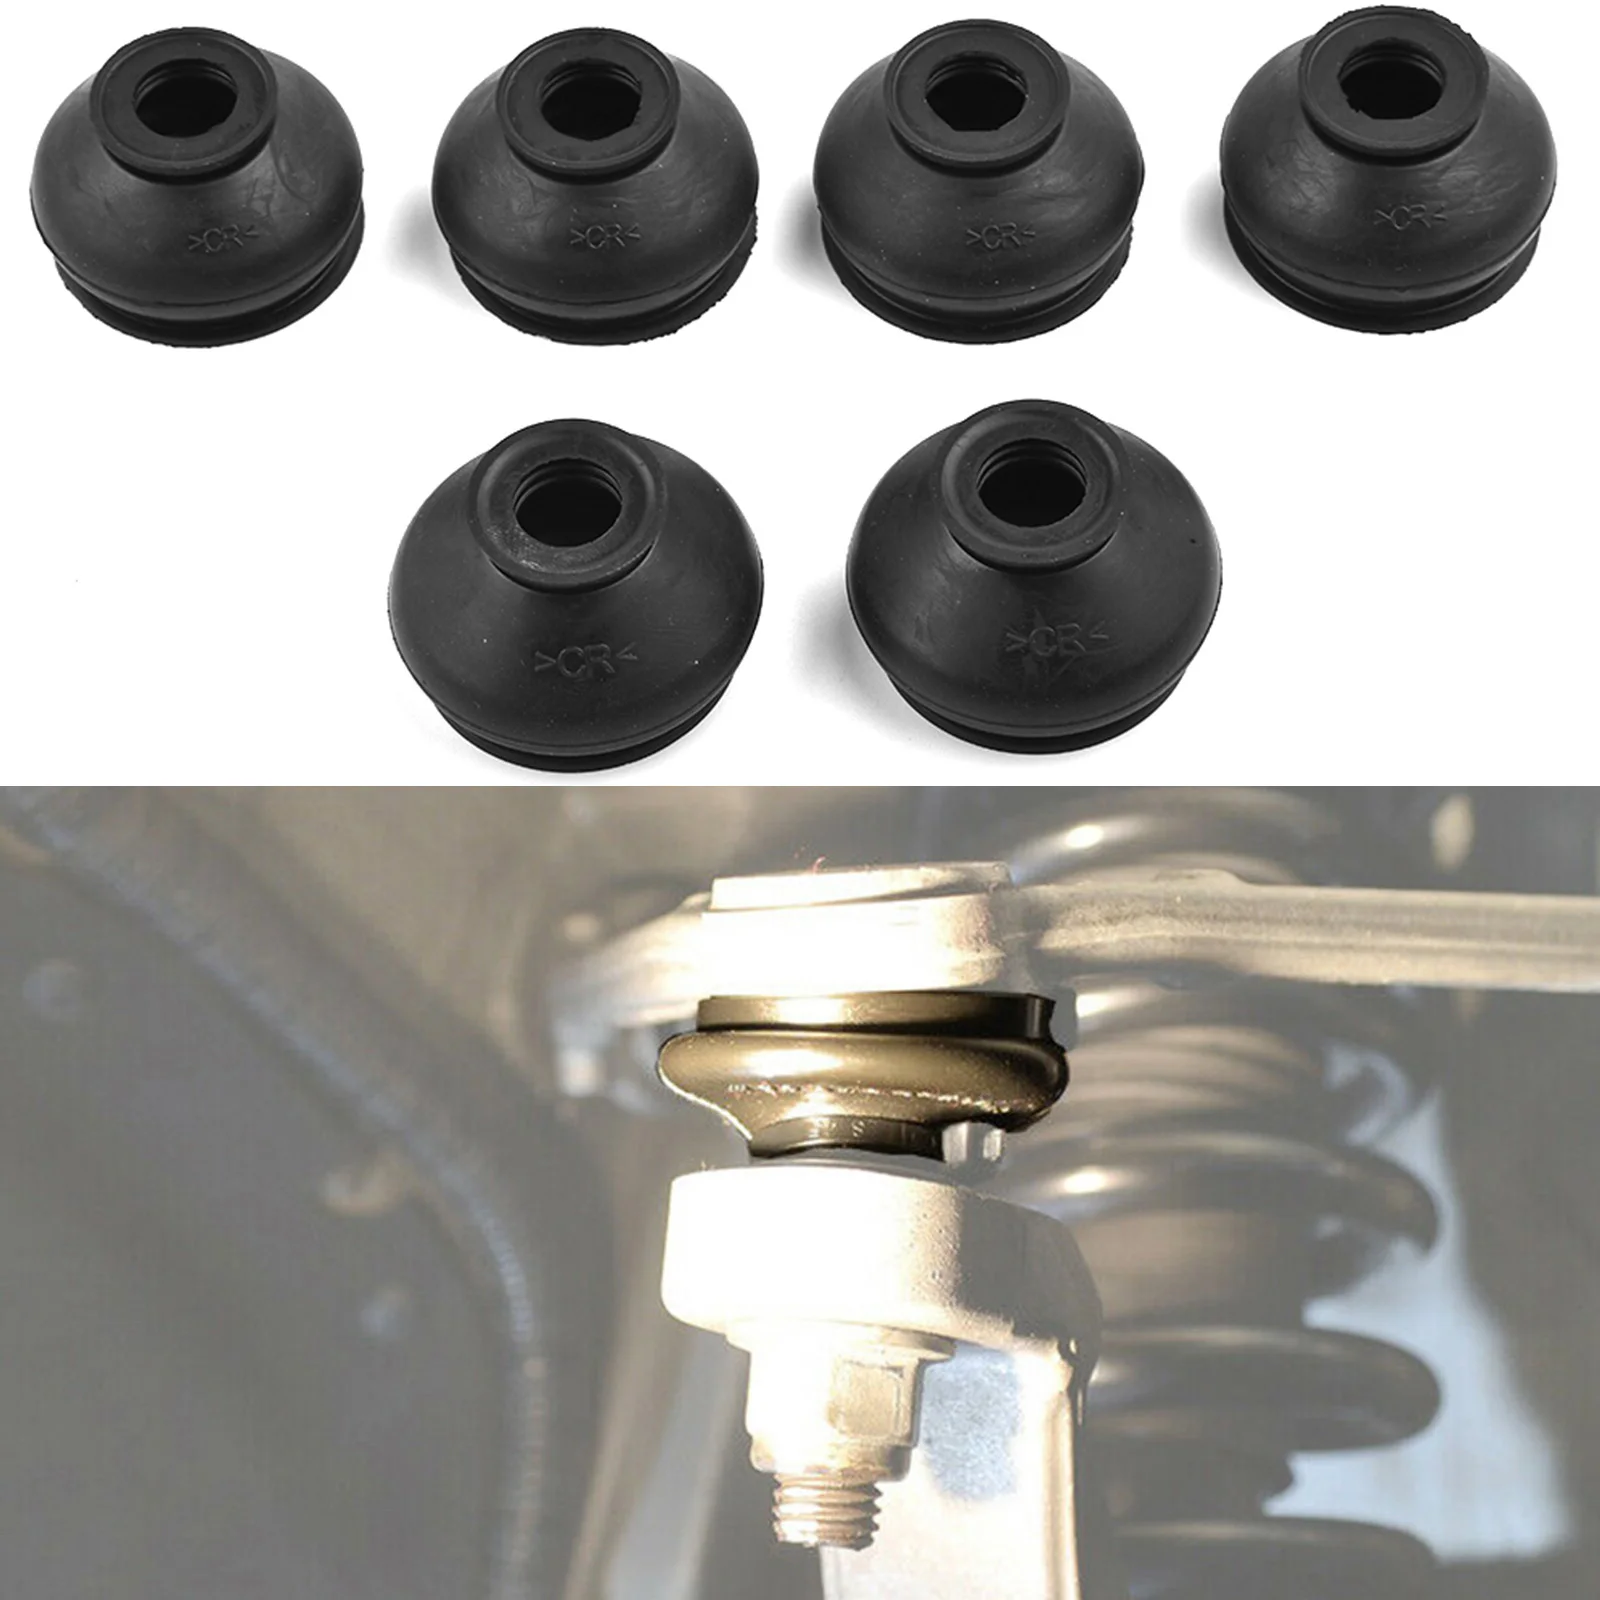 car accessories dust boot covers ball joint ball joint dust cover brand new high quality suspension replacement boot Car Dust Boot Covers Accessories Ball Joint Universal Vehicle 6 Pcs/set Decor Gaiters Parts Replacement Rubber